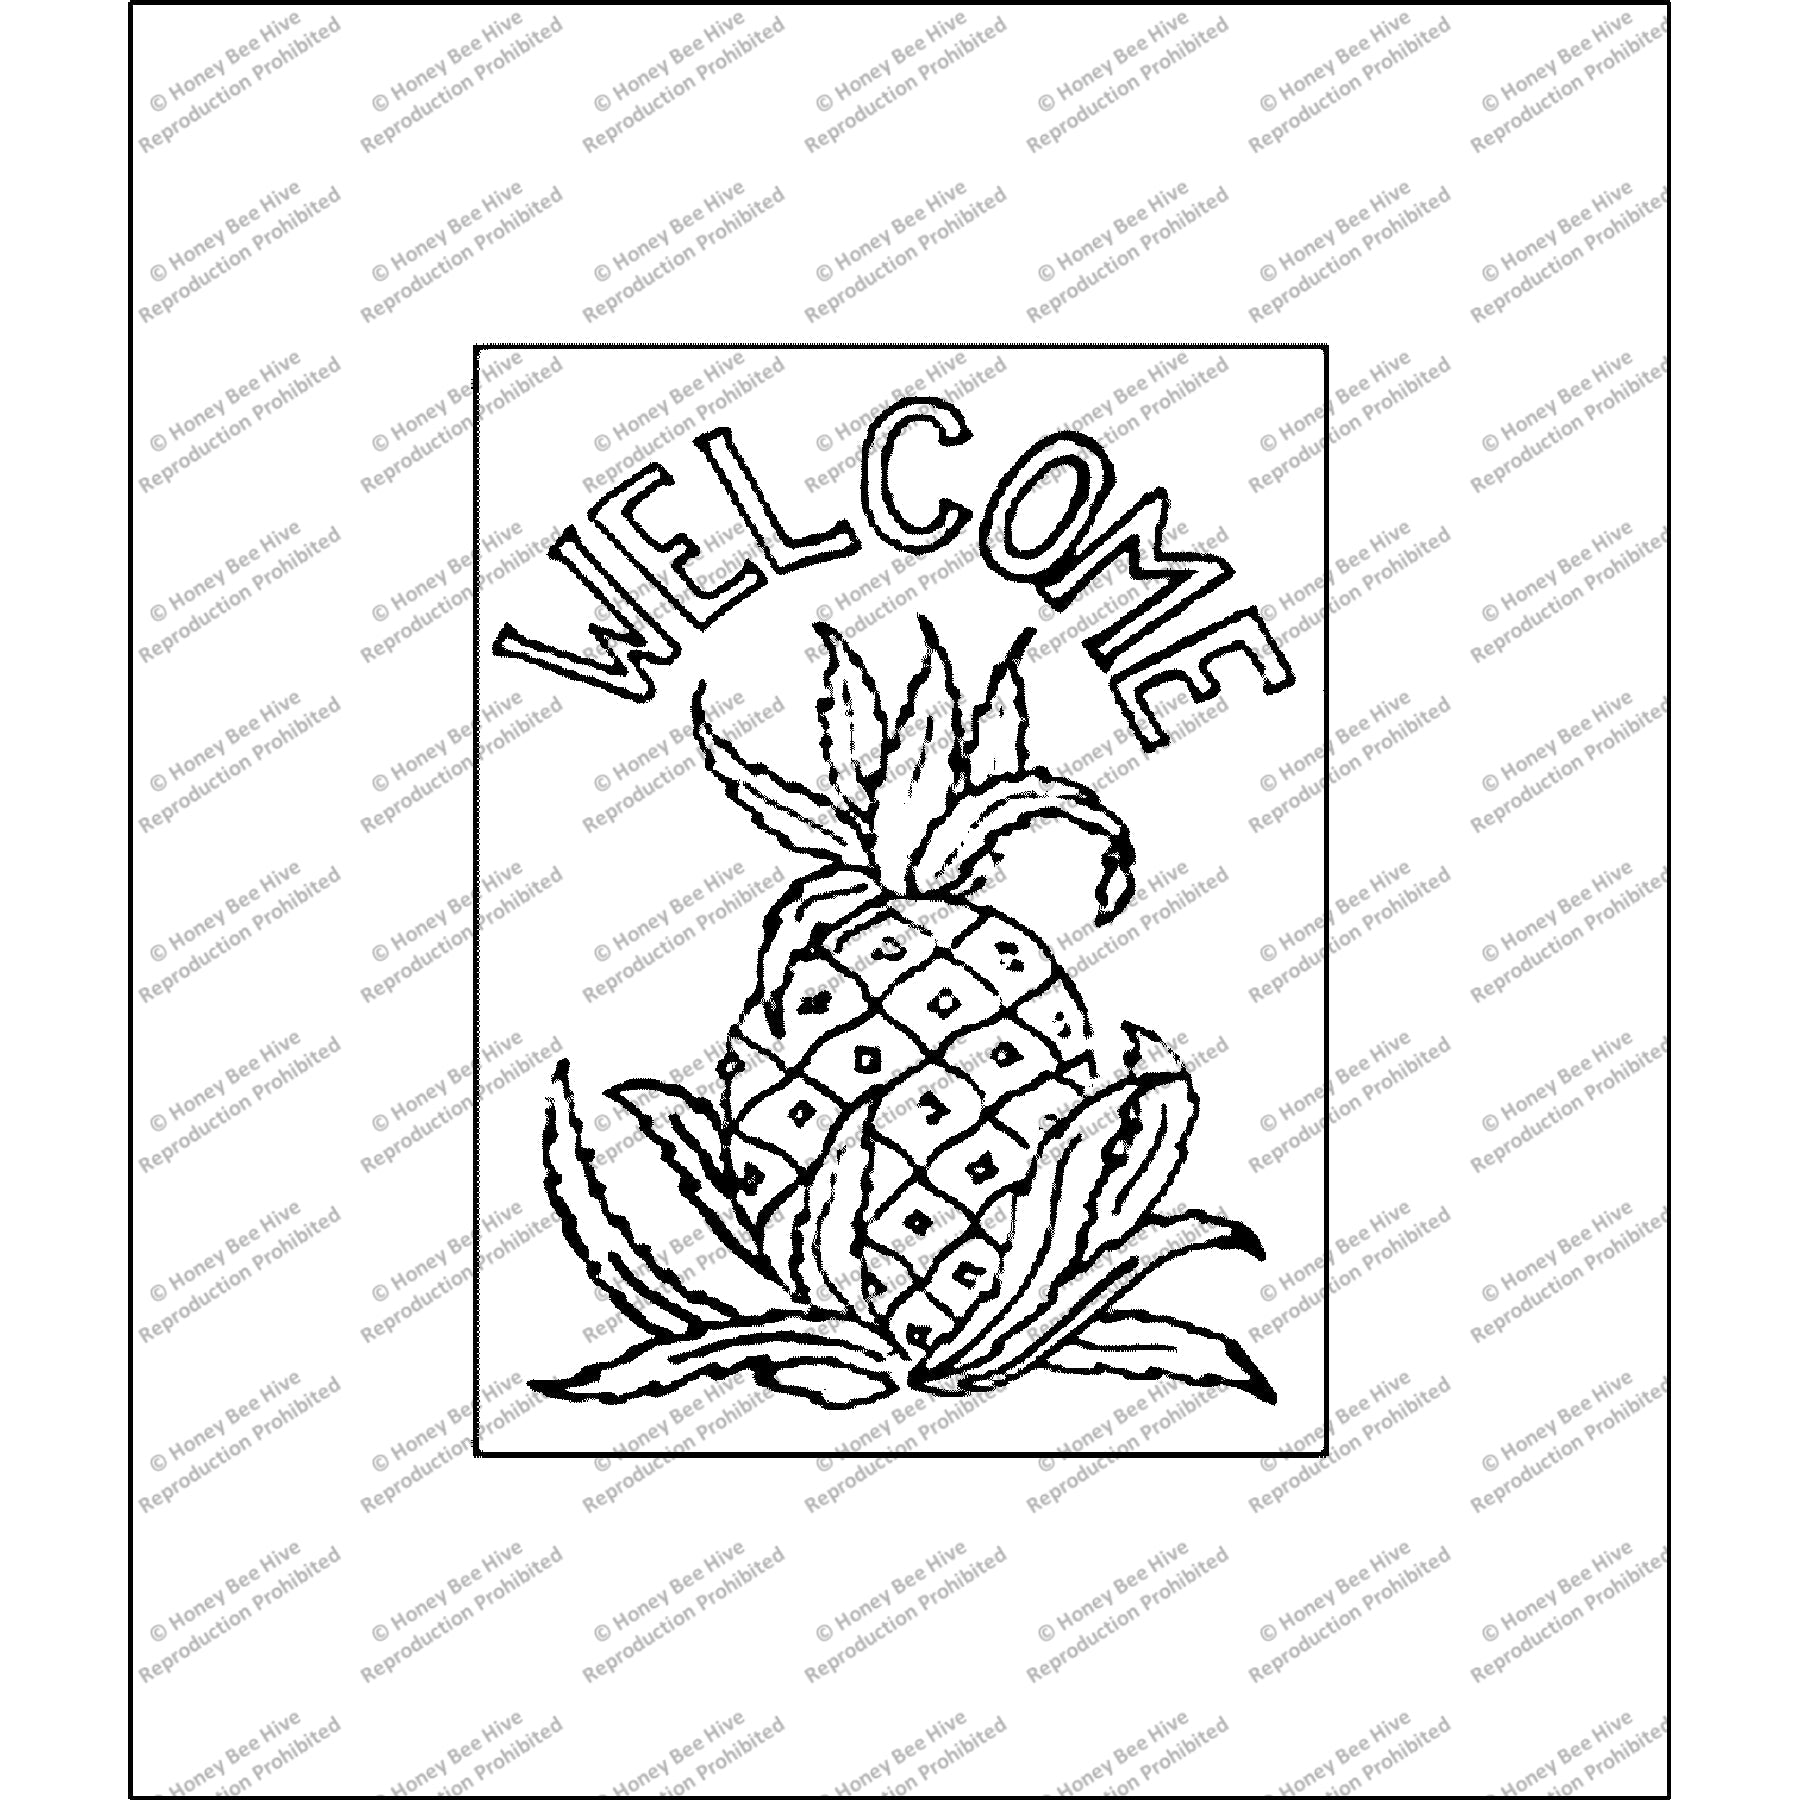 Welcome Pineapple - with Border, rug hooking pattern